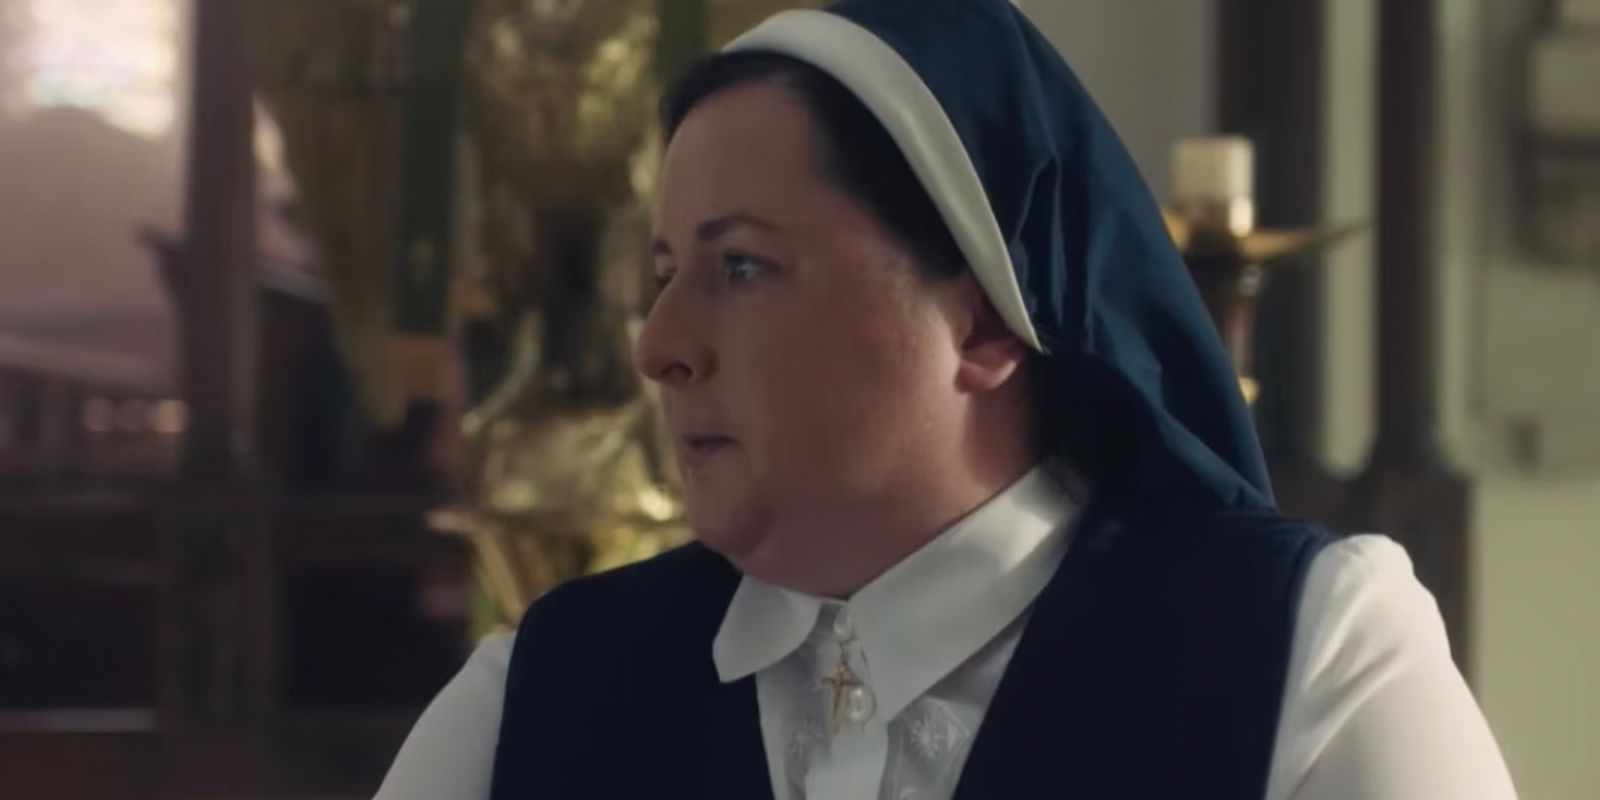 Sister Michael appears upset as she looks away in Derry Girls